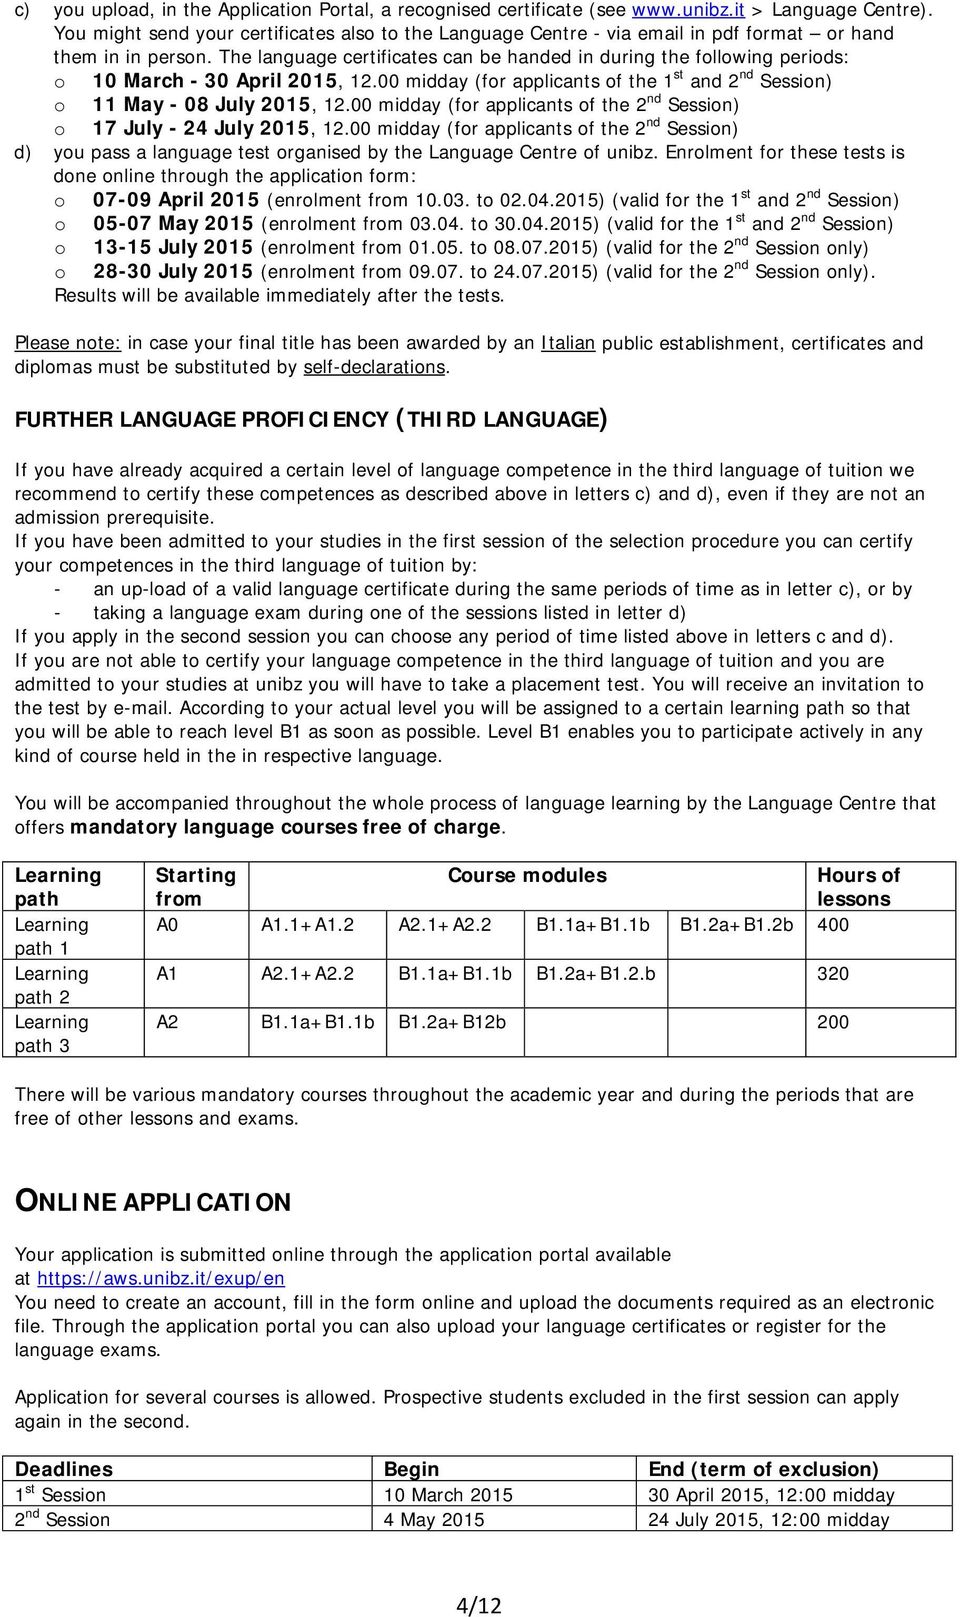 The language certificates can be handed in during the following periods: o 10 March - 30 April 2015, 12.00 midday (for applicants of the 1 st and 2 nd Session) o 11 May - 08 July 2015, 12.